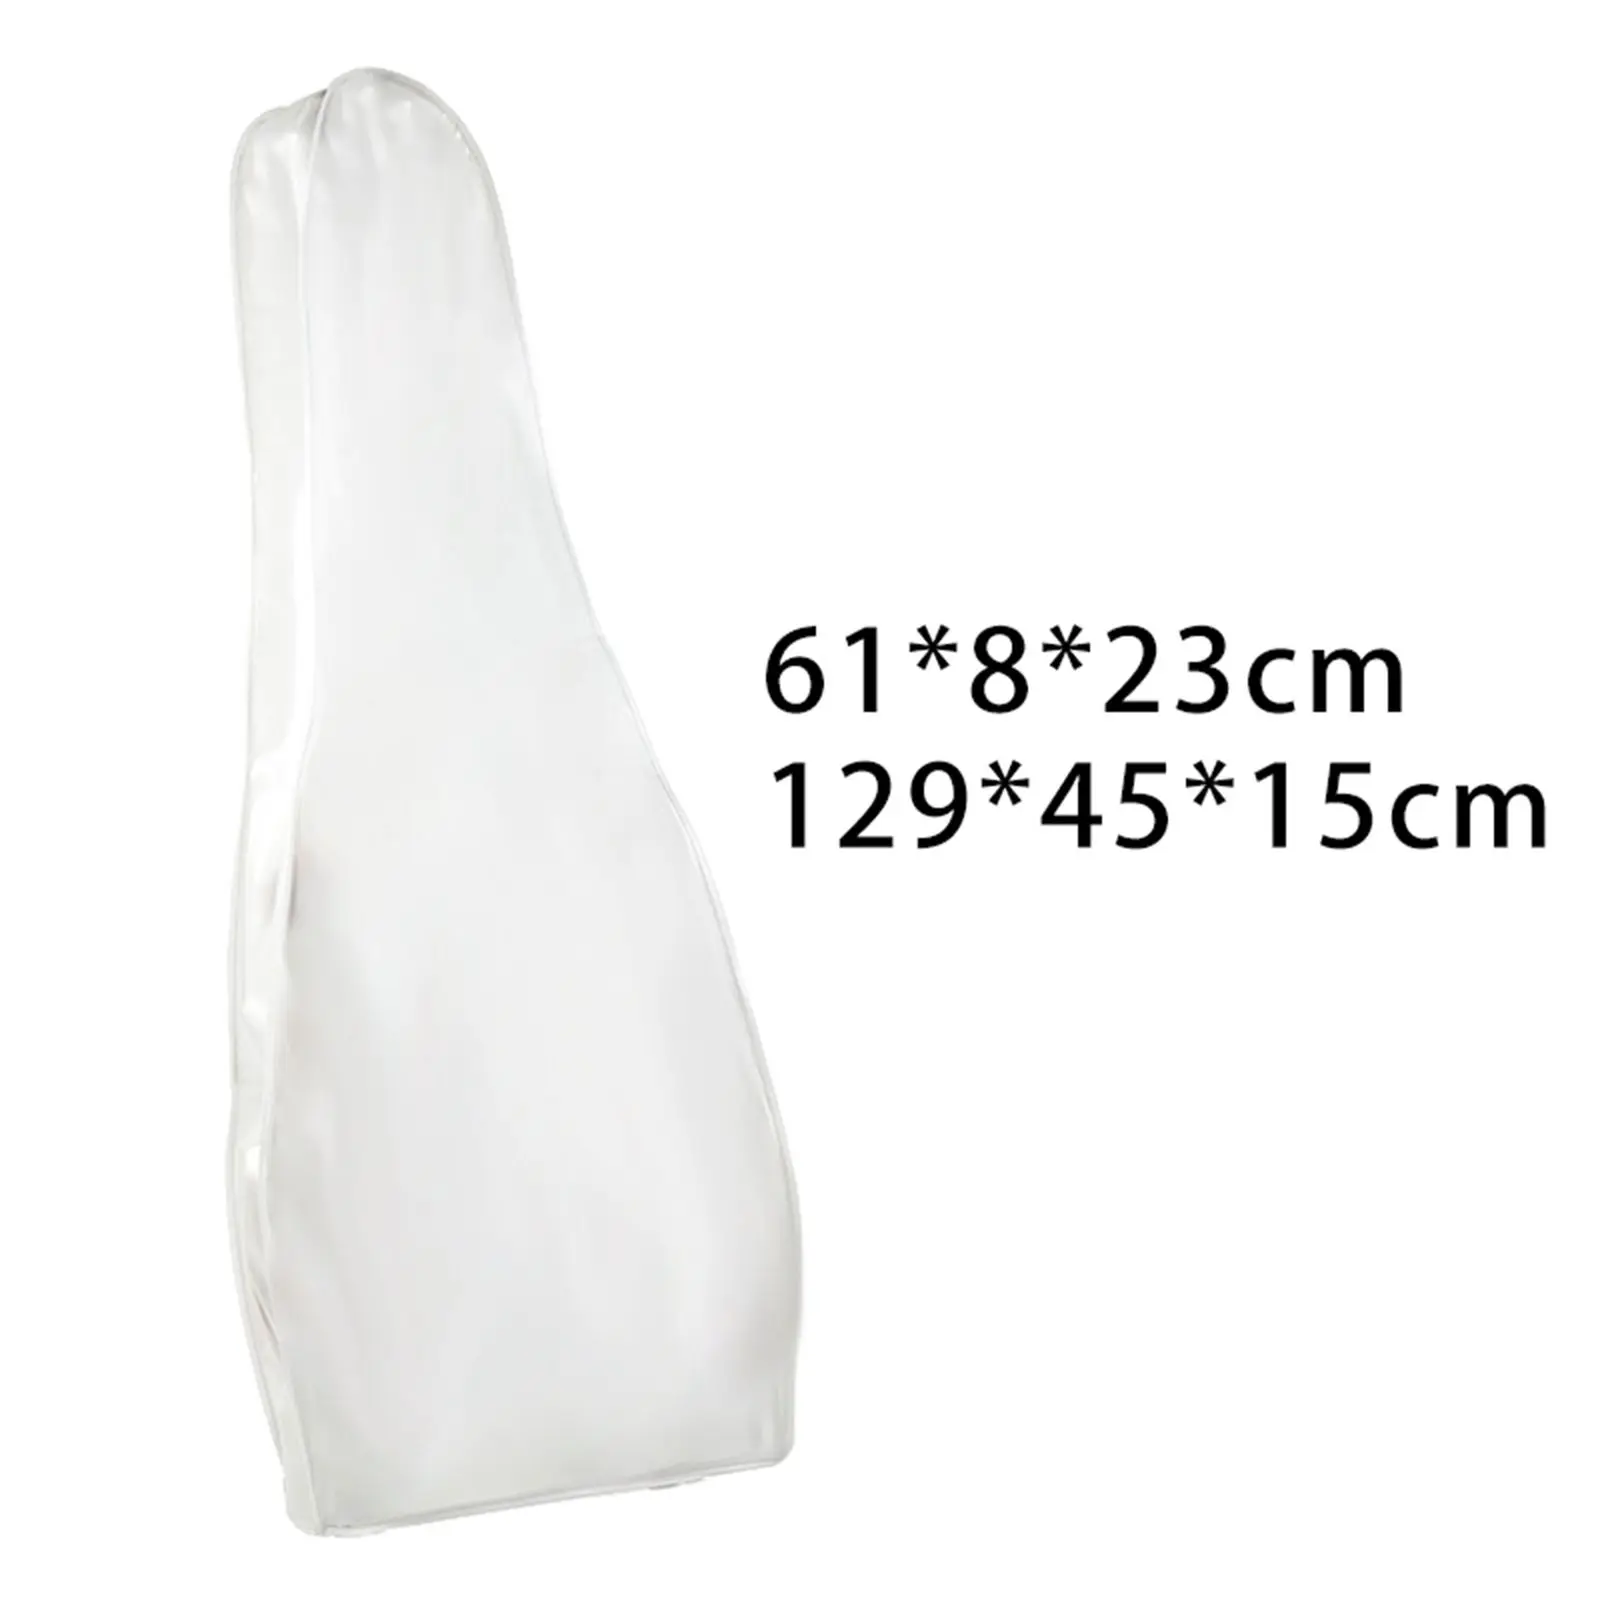 Clear Violin Shell Case, Durable Lightweight, Waterproof for T-07 Violin, T-08 Cello, Full Size Violin